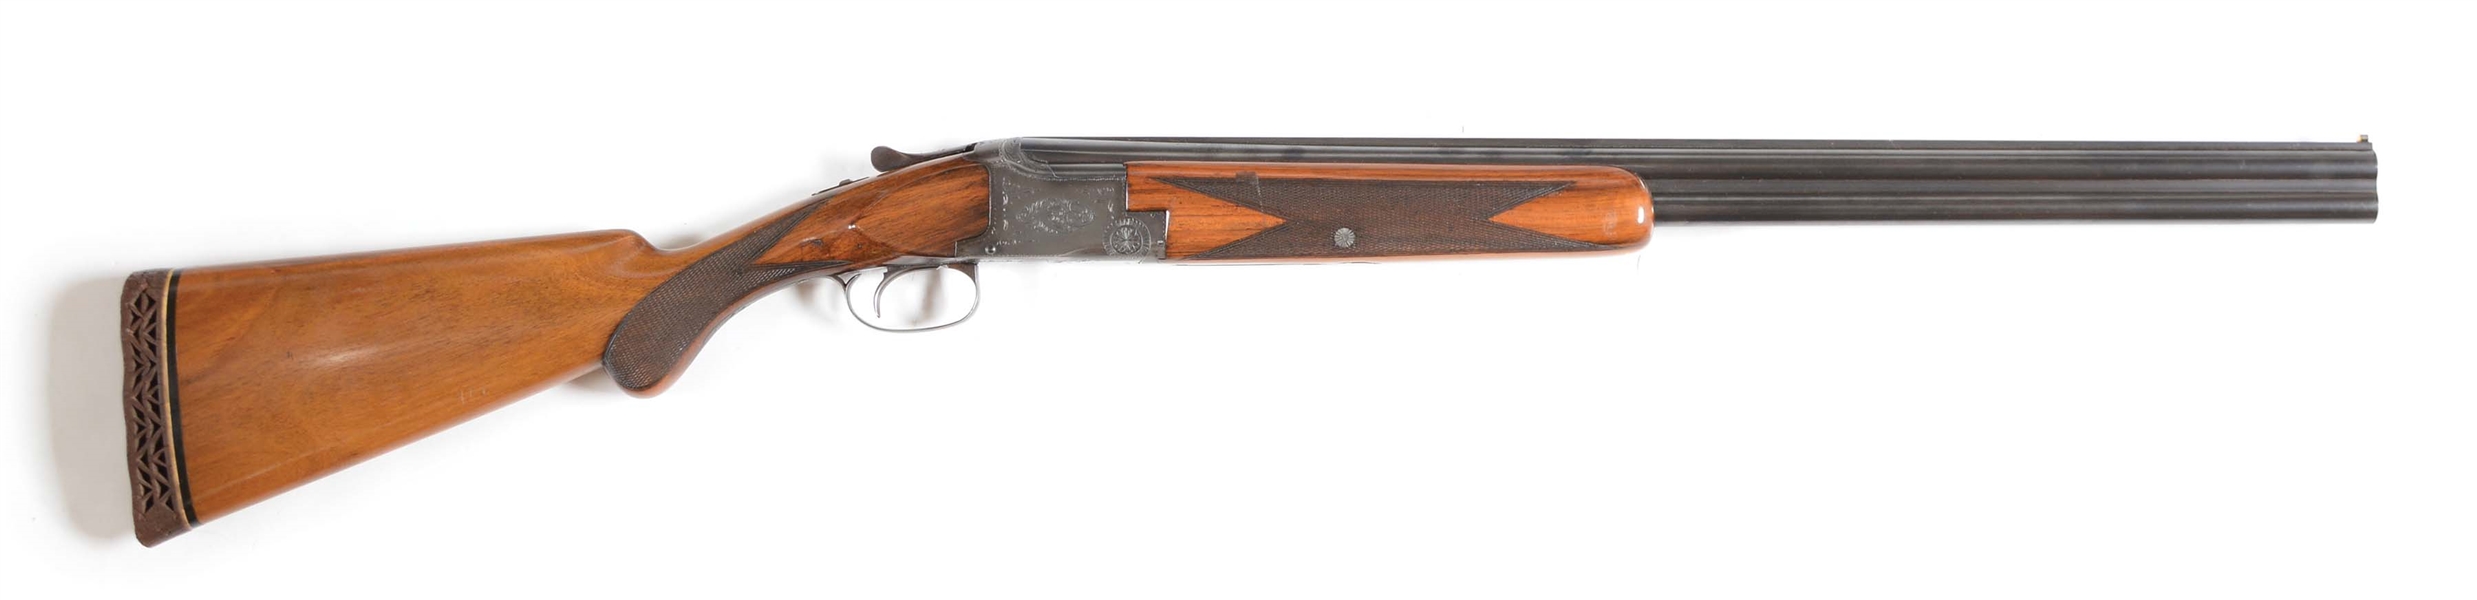 (M) EARLY BROWNING GRADE ONE SUPERPOSED 20 BORE OVER/UNDER SHOTGUN.